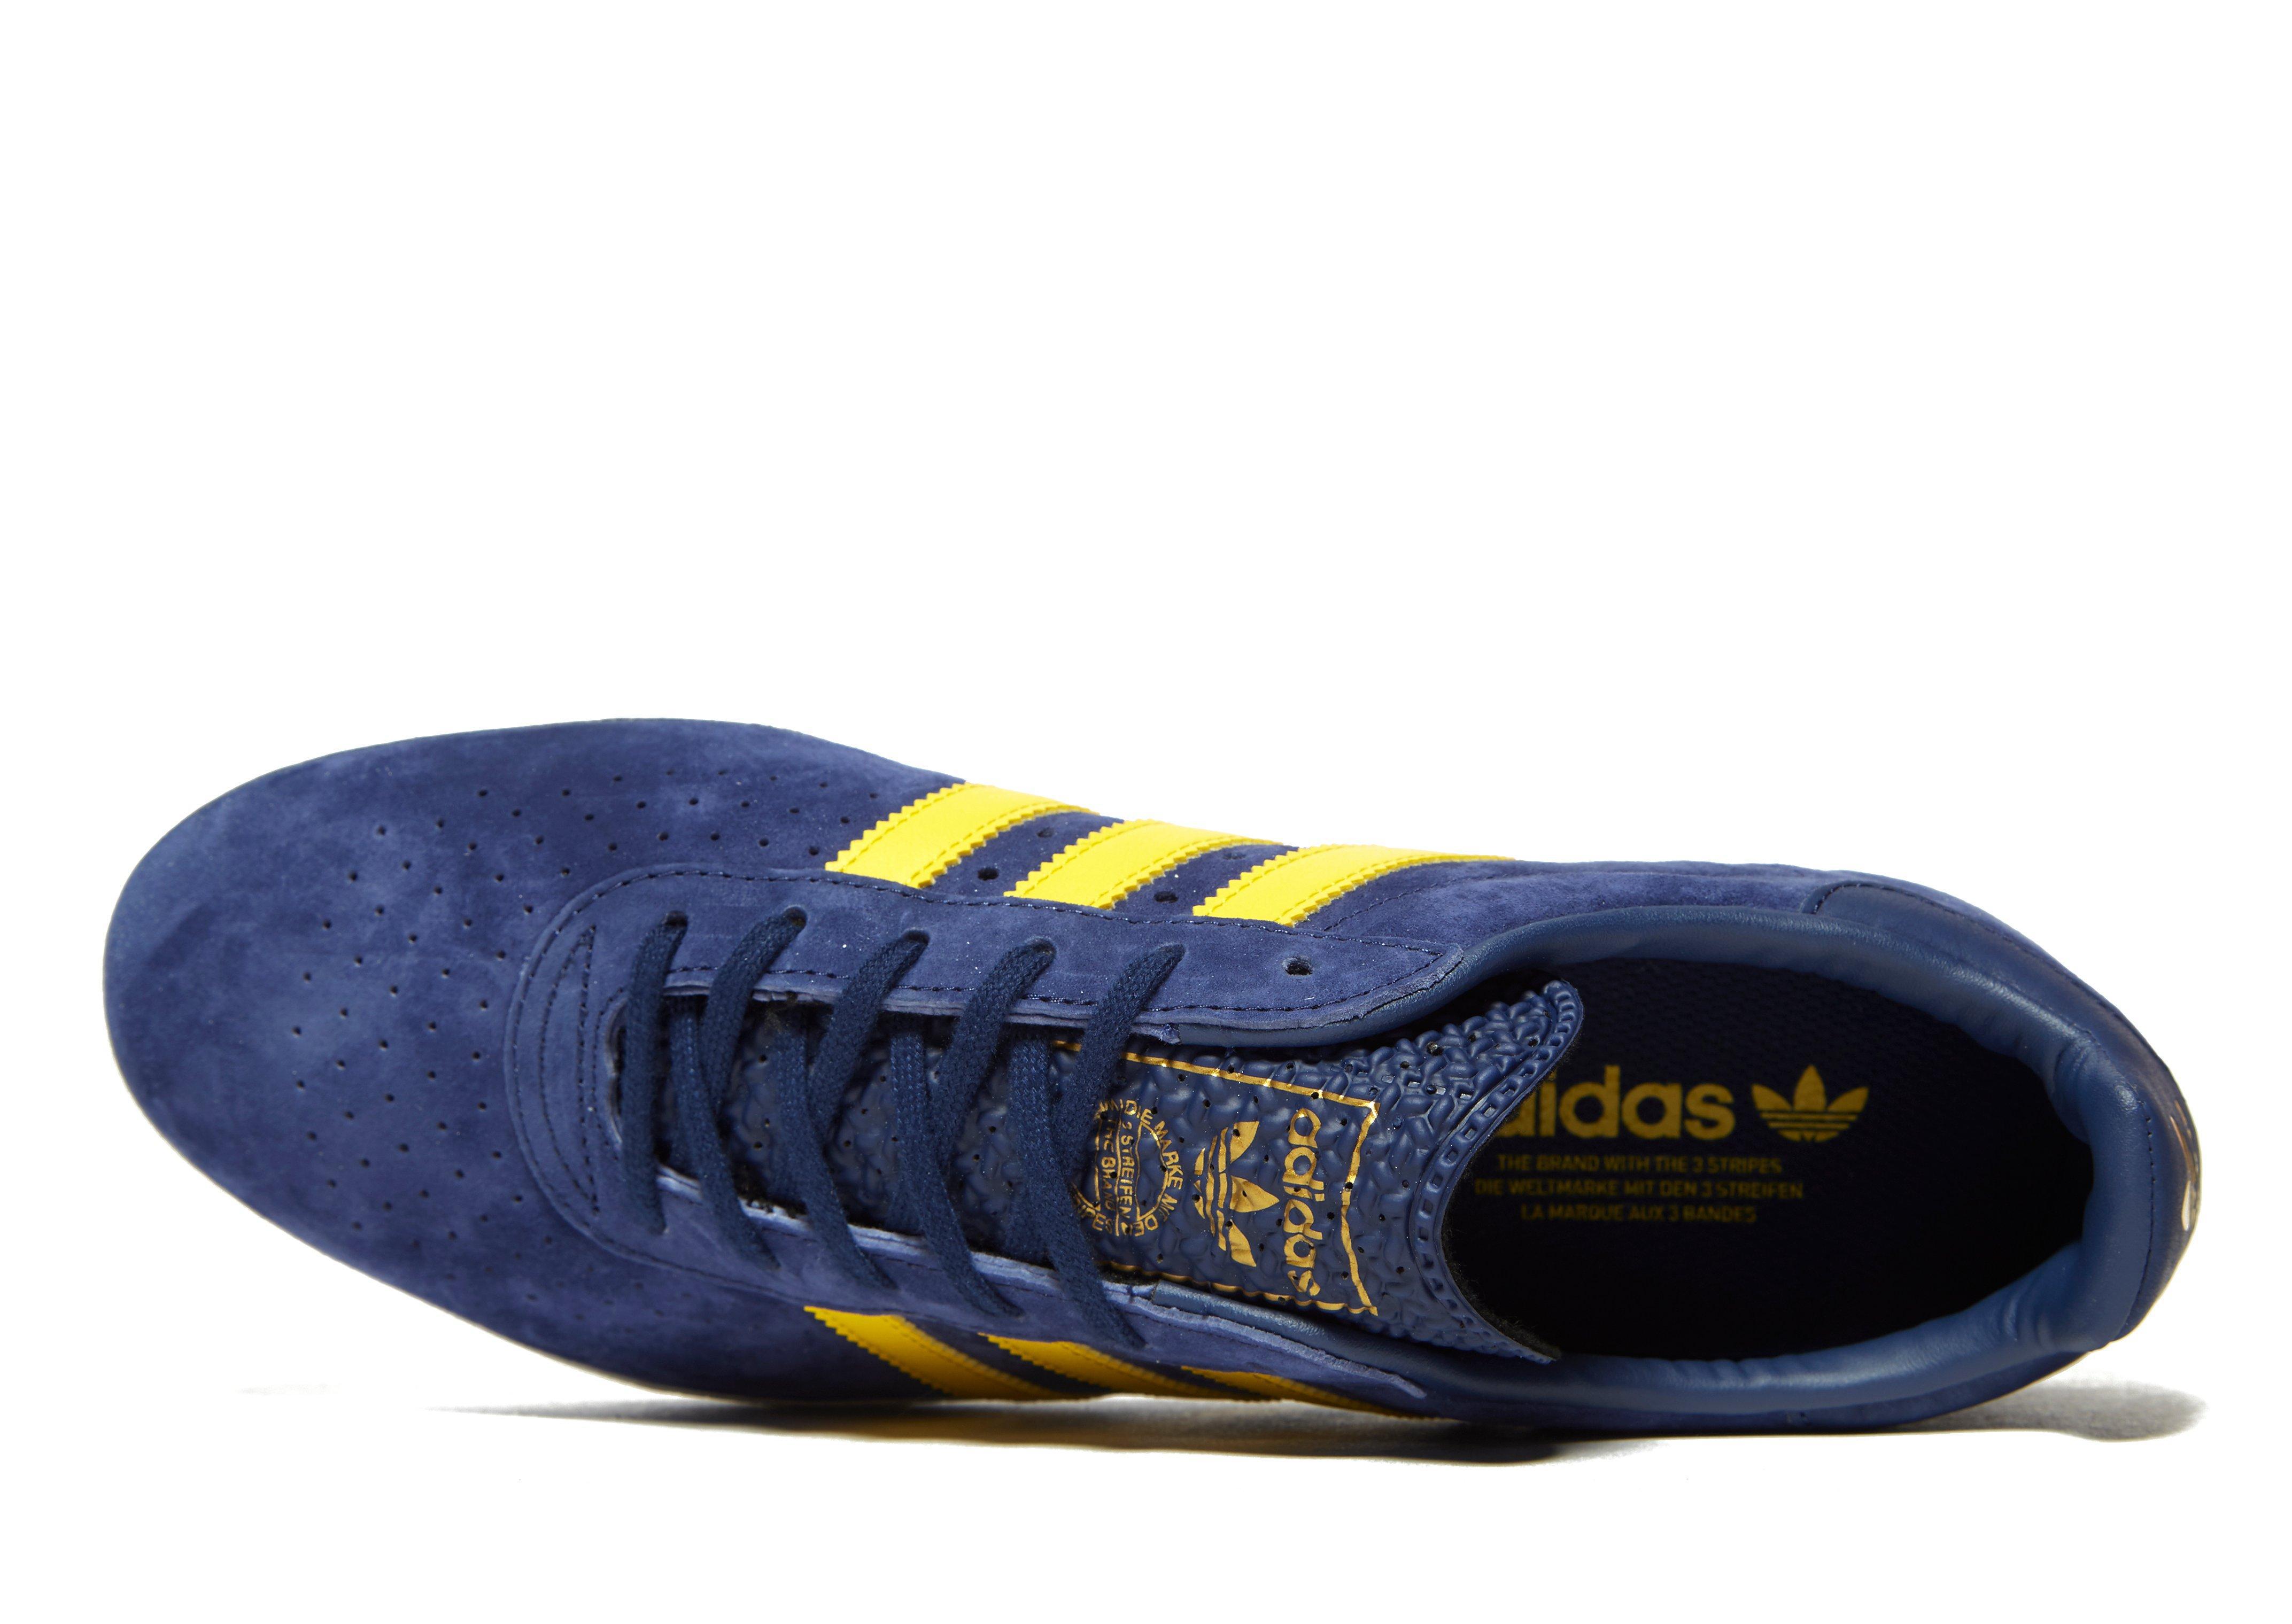 adidas 350 blue and yellow